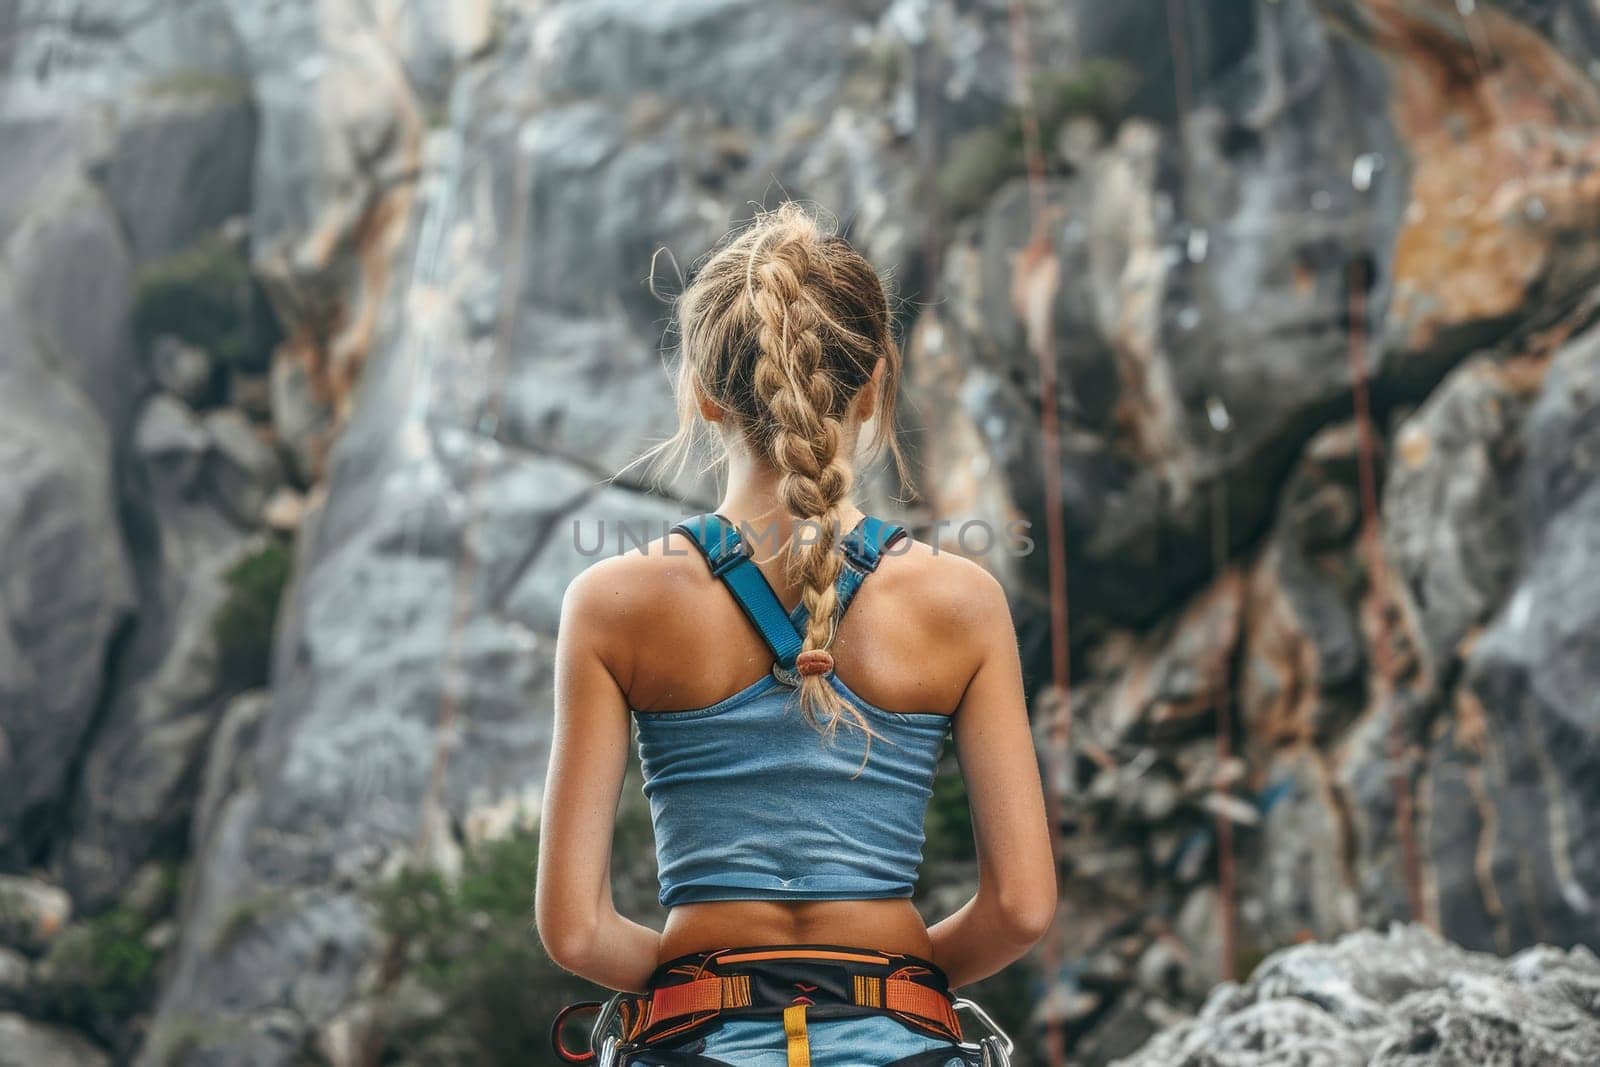 A woman with long blonde hair is standing on a rocky cliff. She is wearing orange pants and a grey shirt